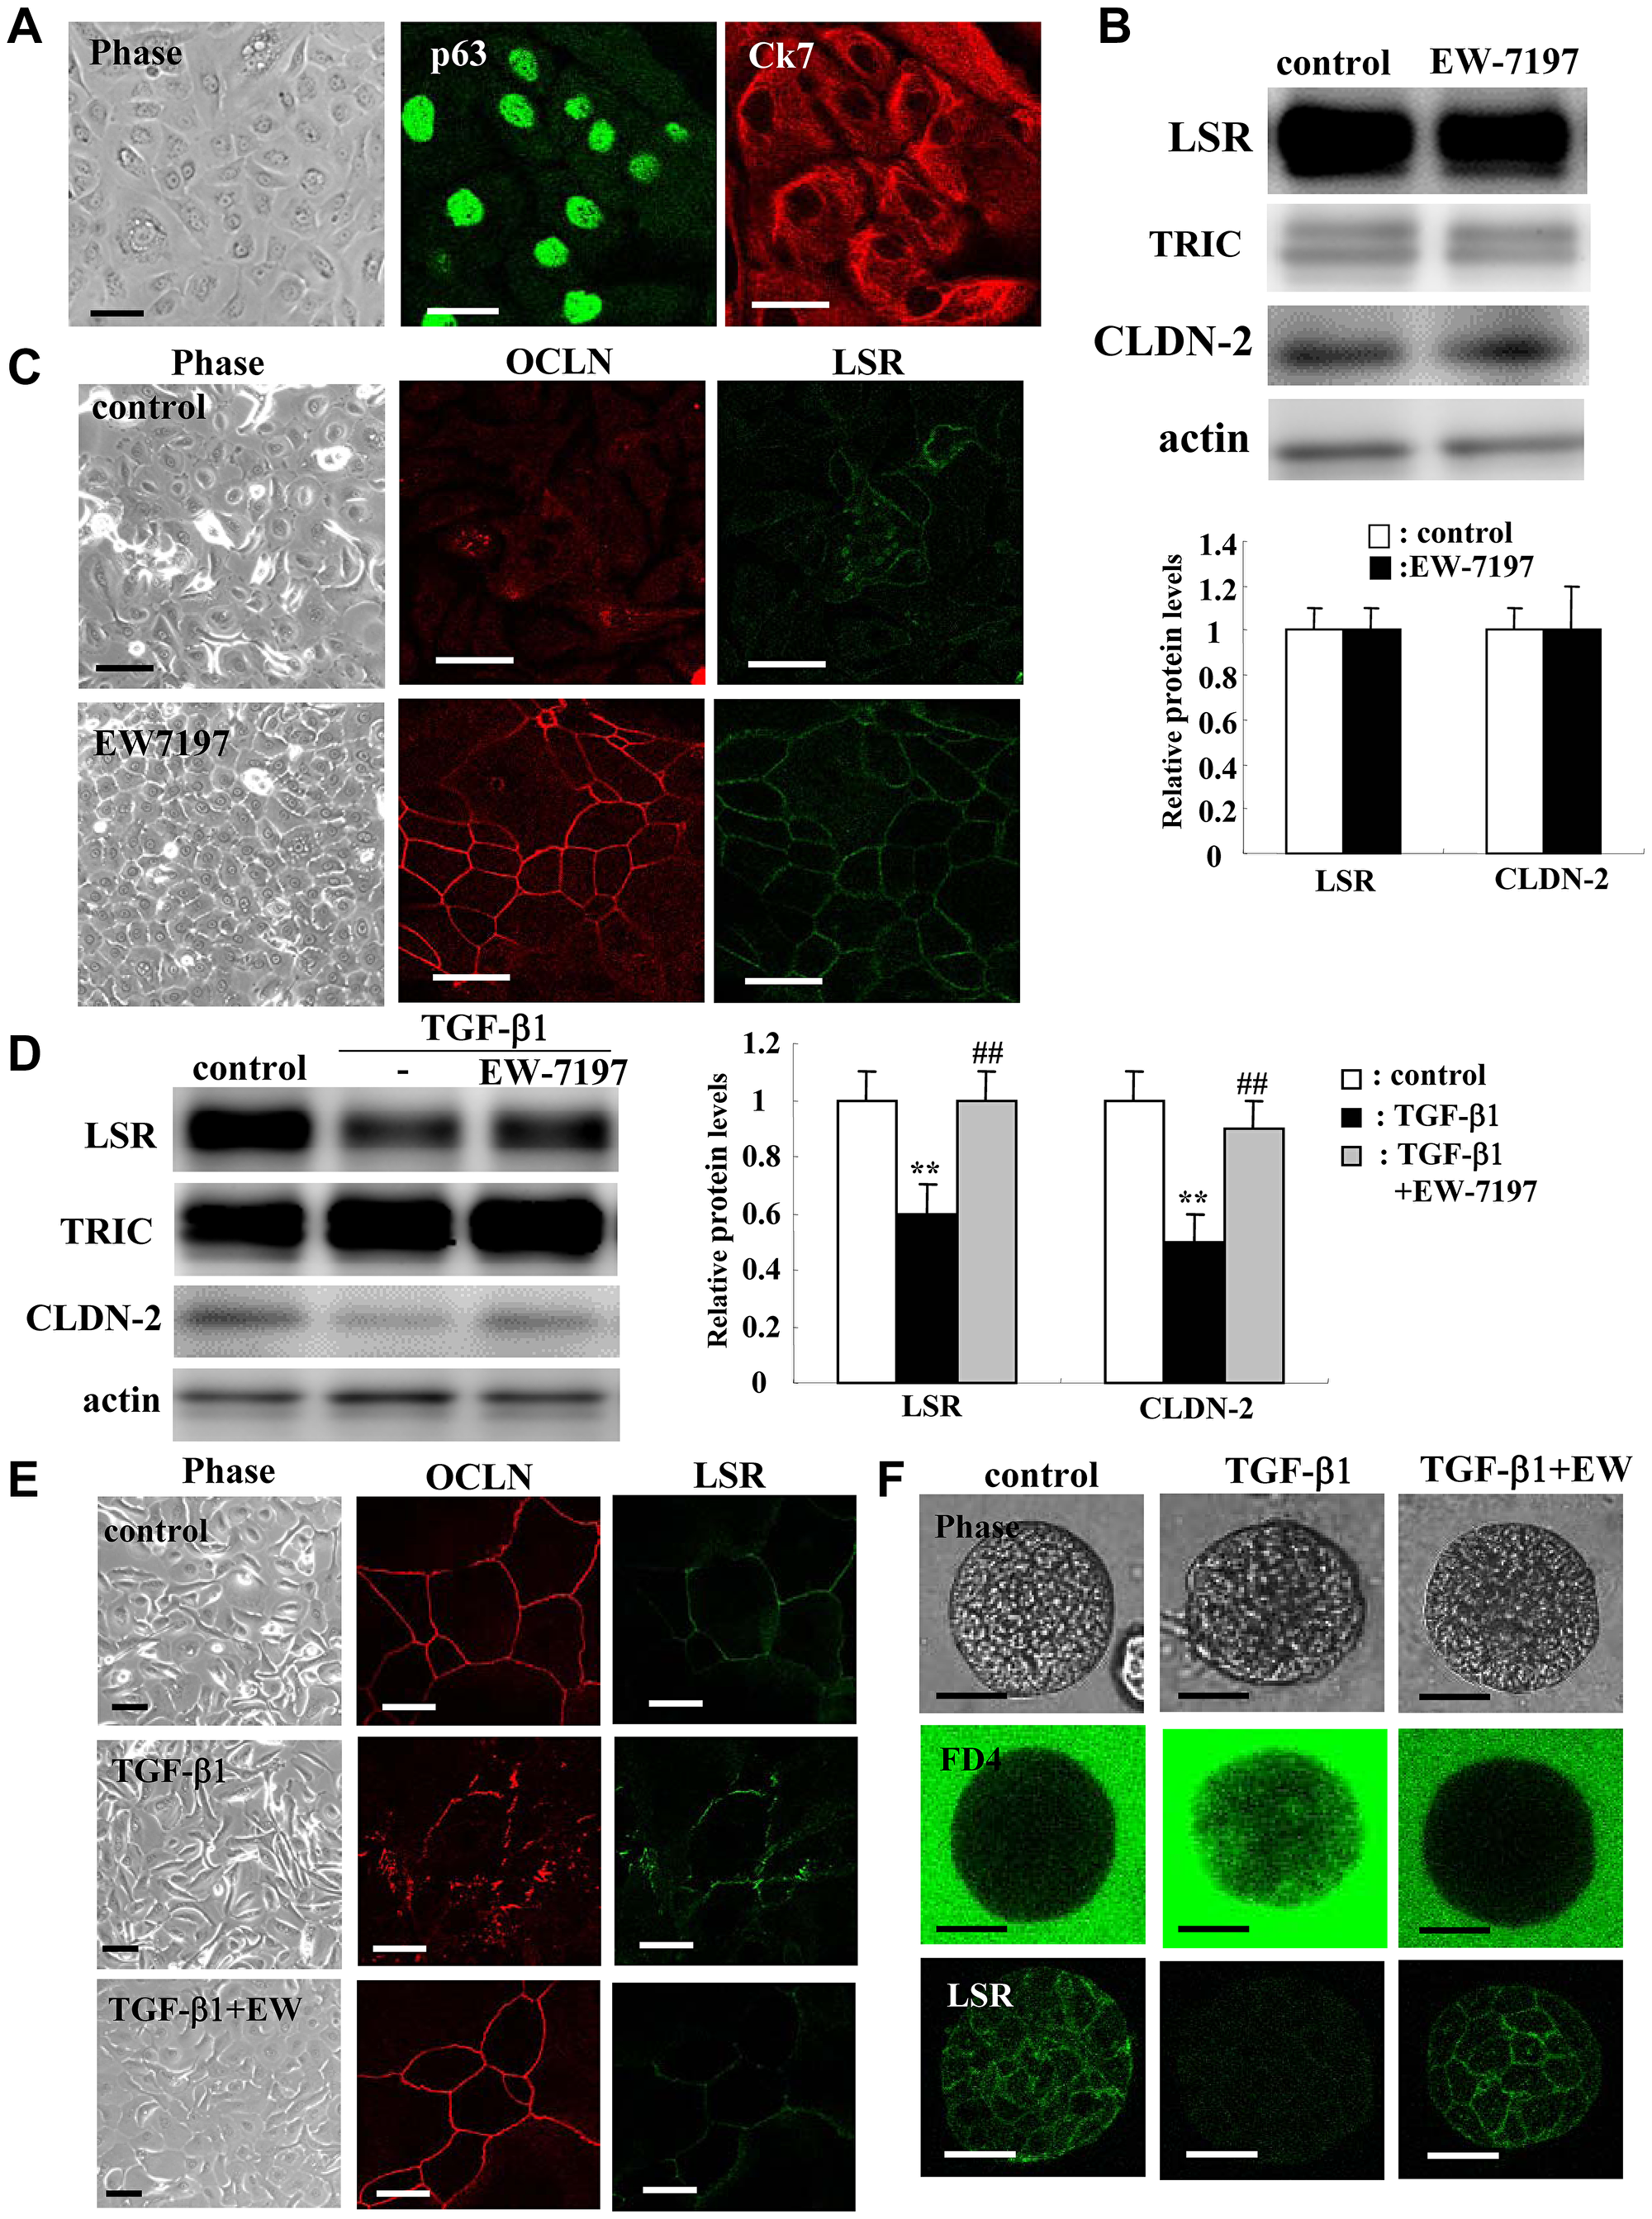 Effects of TGF-β receptor inhibitor EW7197 with and without TGF-β1 for LSR, TRIC, OCLN, and CLDN-2 in human lung epithelial cells (HLE) cells with and without 10% FBS.